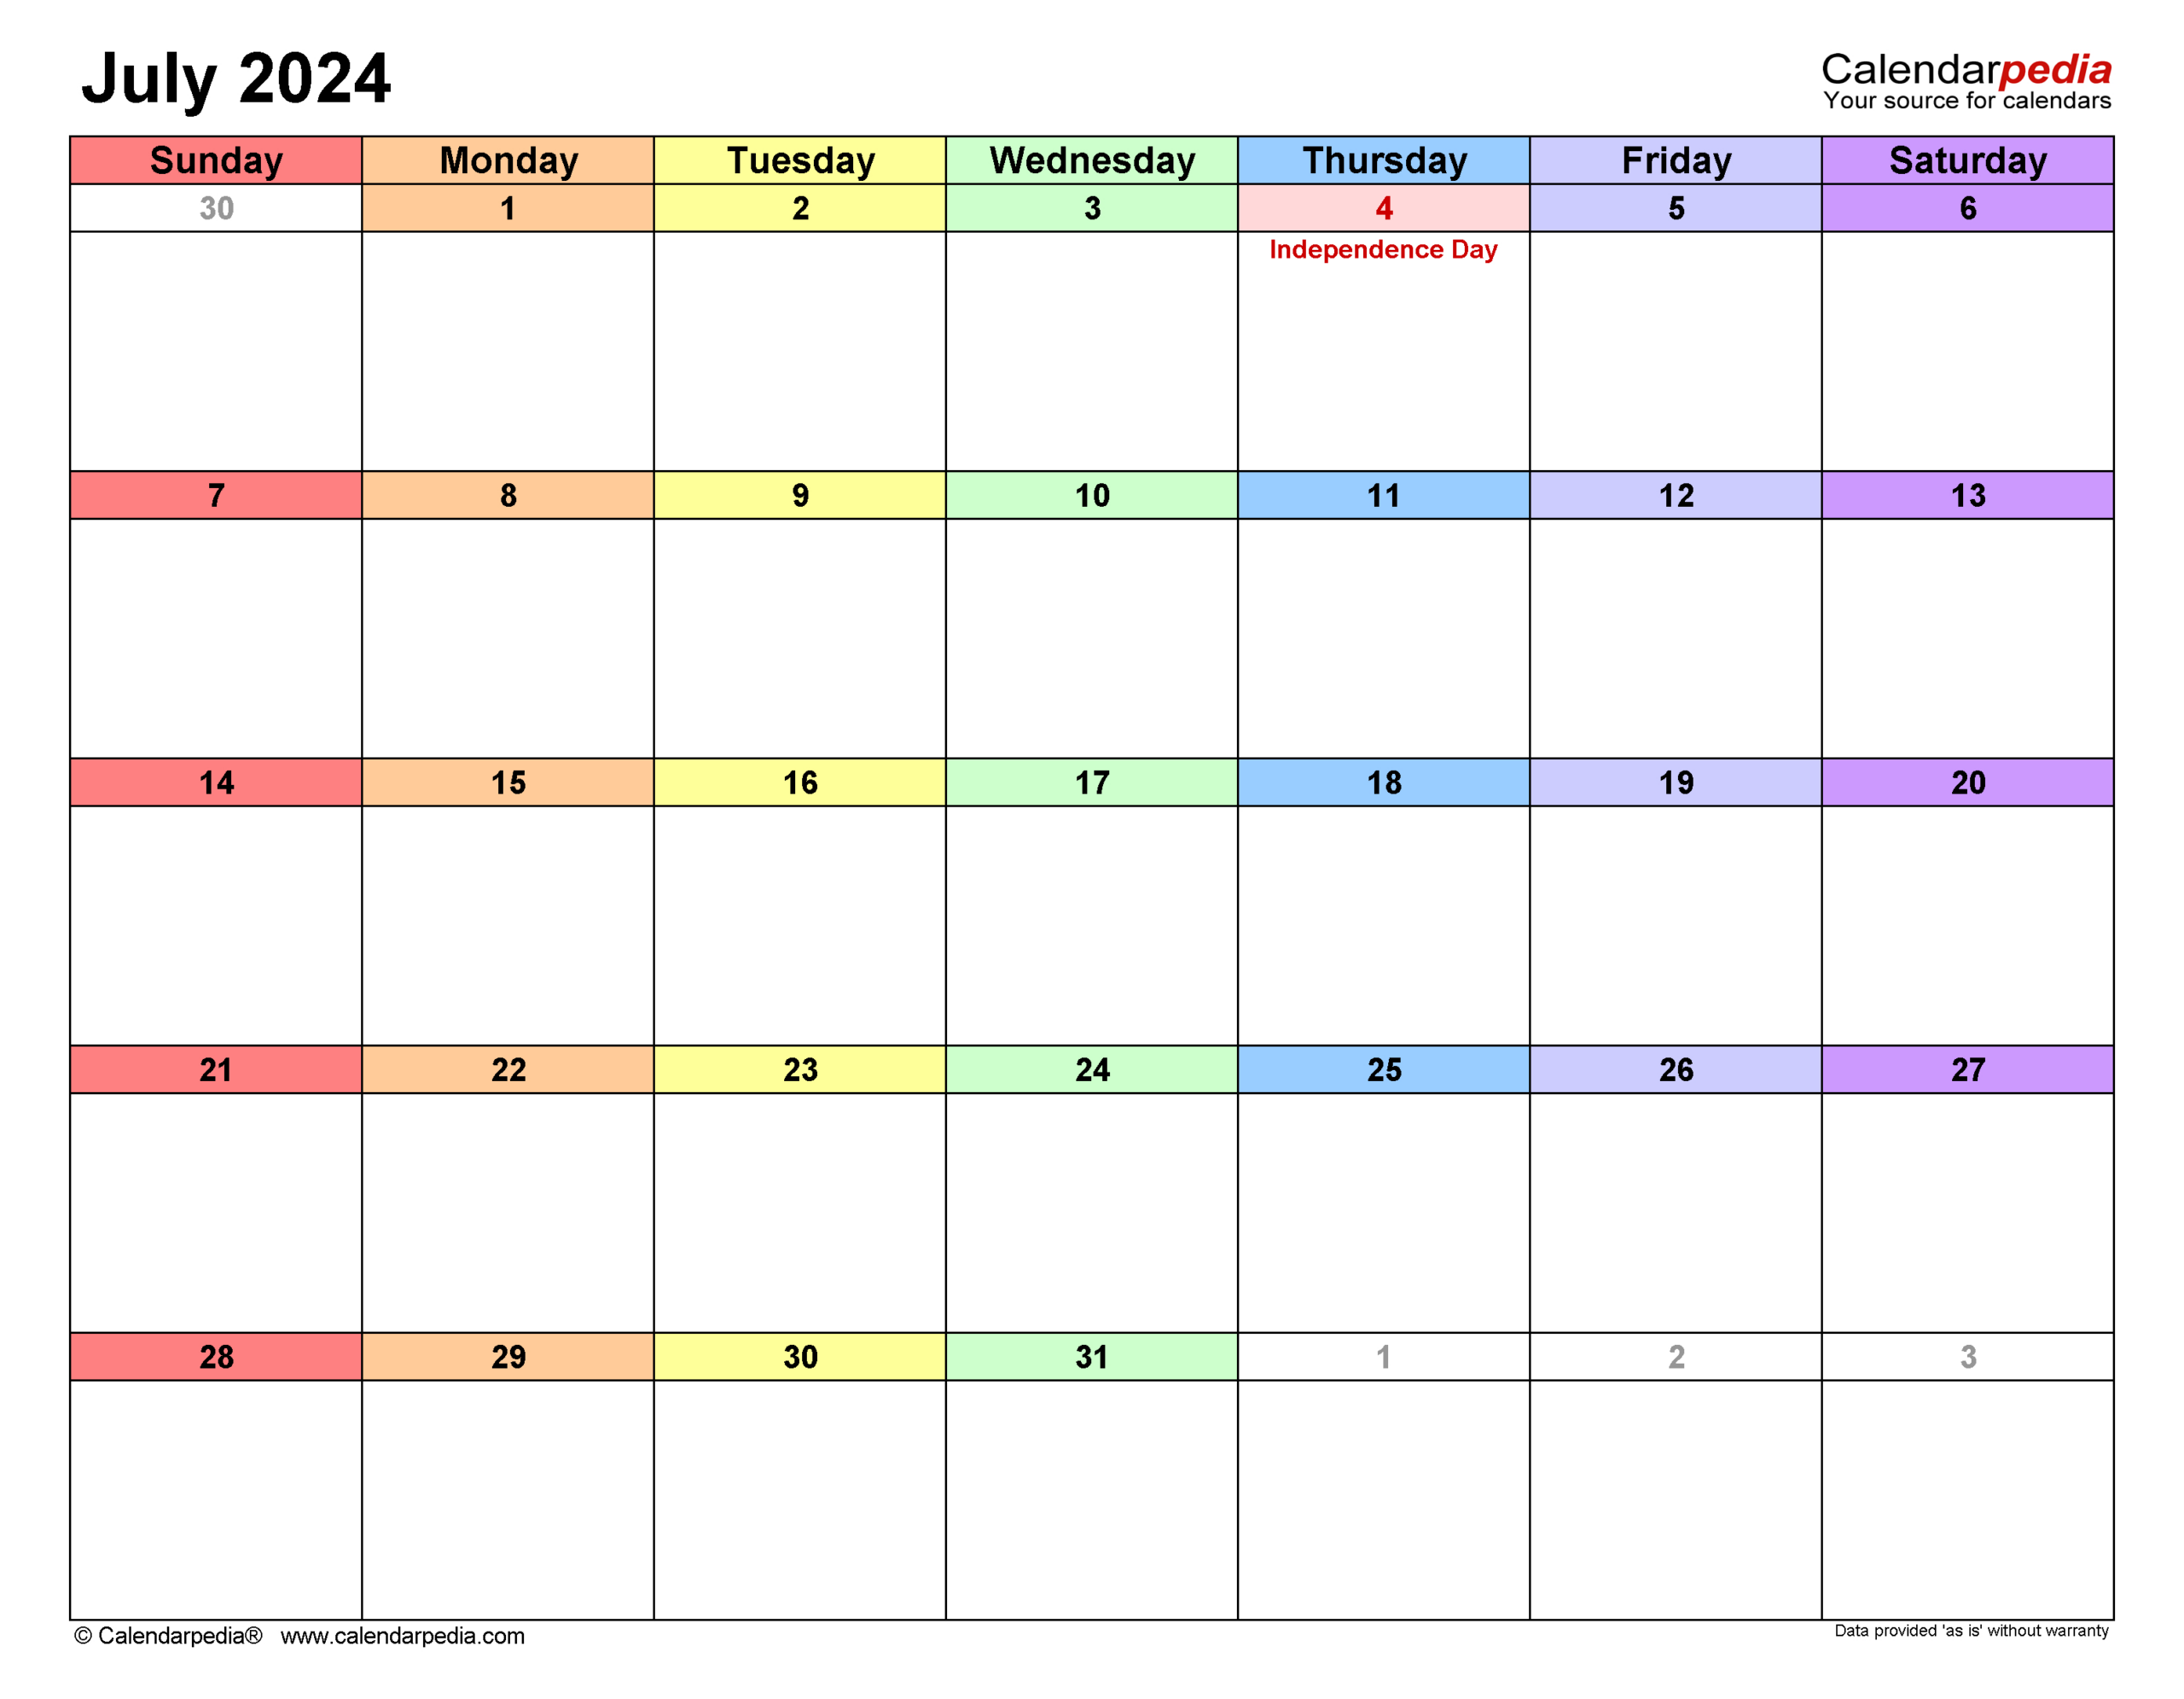 July 2024 Calendar | Templates For Word, Excel And Pdf throughout July 2024 Editable Calendar